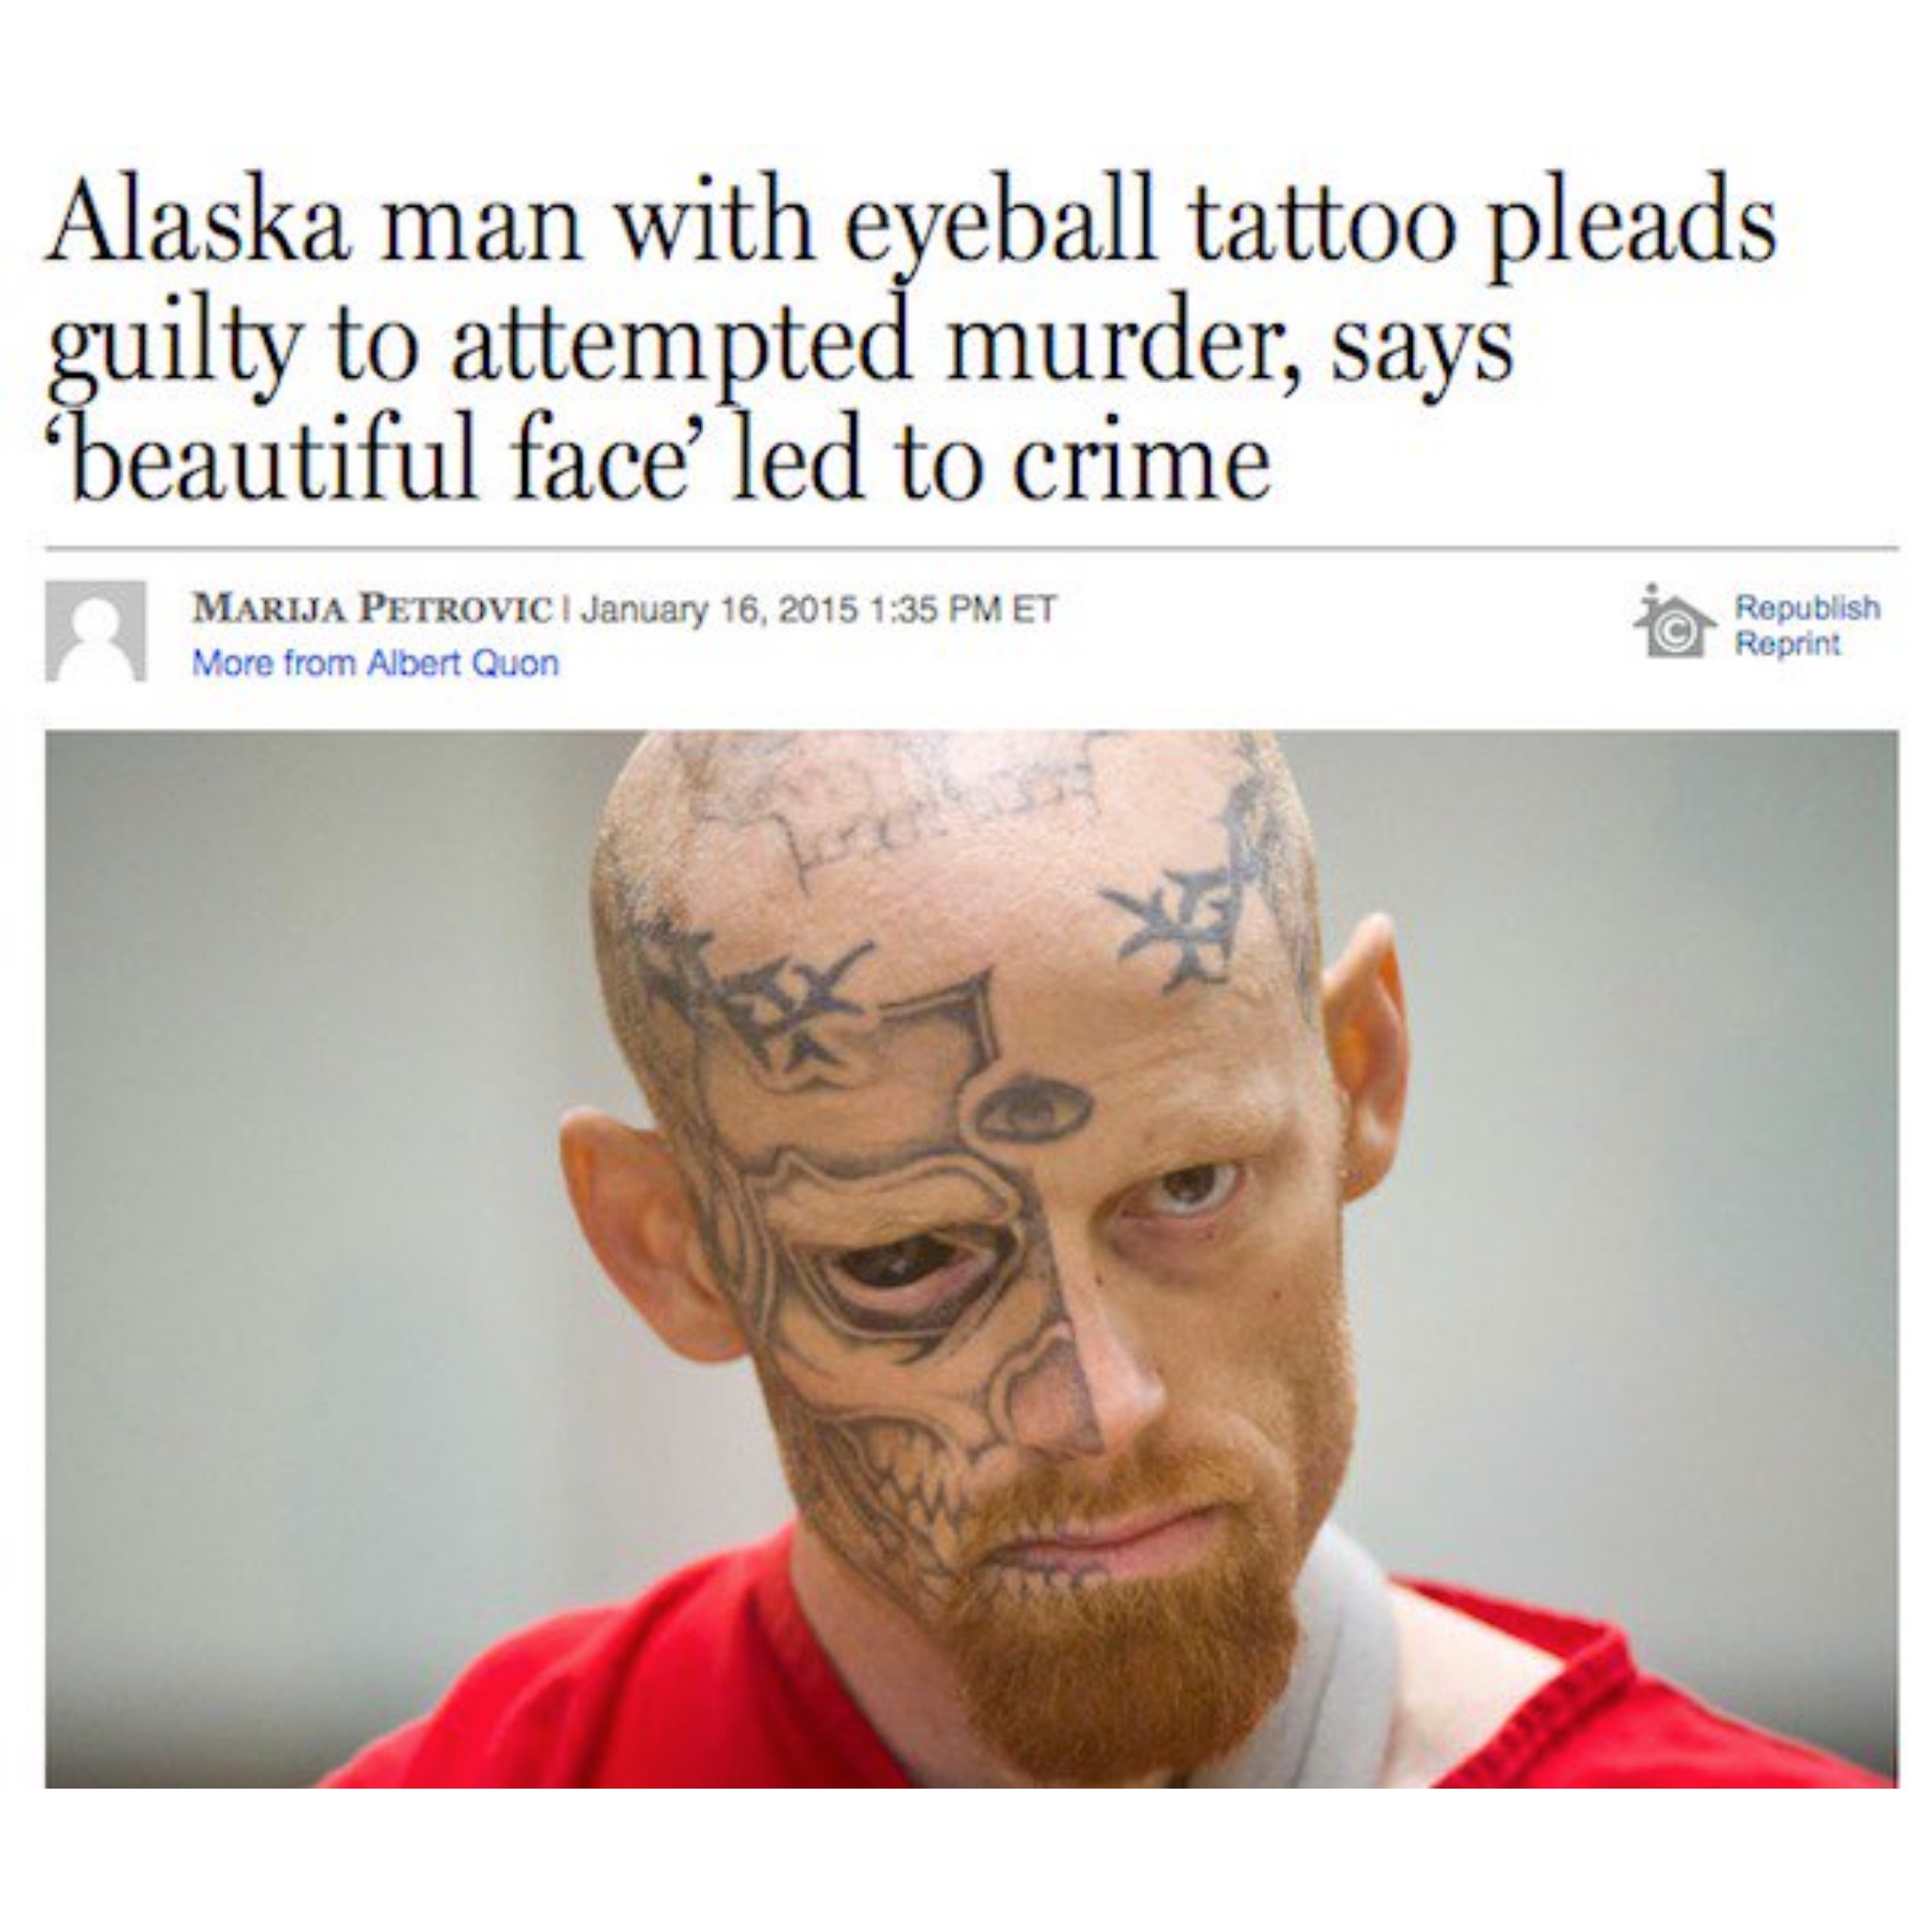 most dangerous prisoners - Alaska man with eyeball tattoo pleads guilty to attempted murder, says beautiful face' led to crime Republish Marija Petrovici Et More from Albert Quon